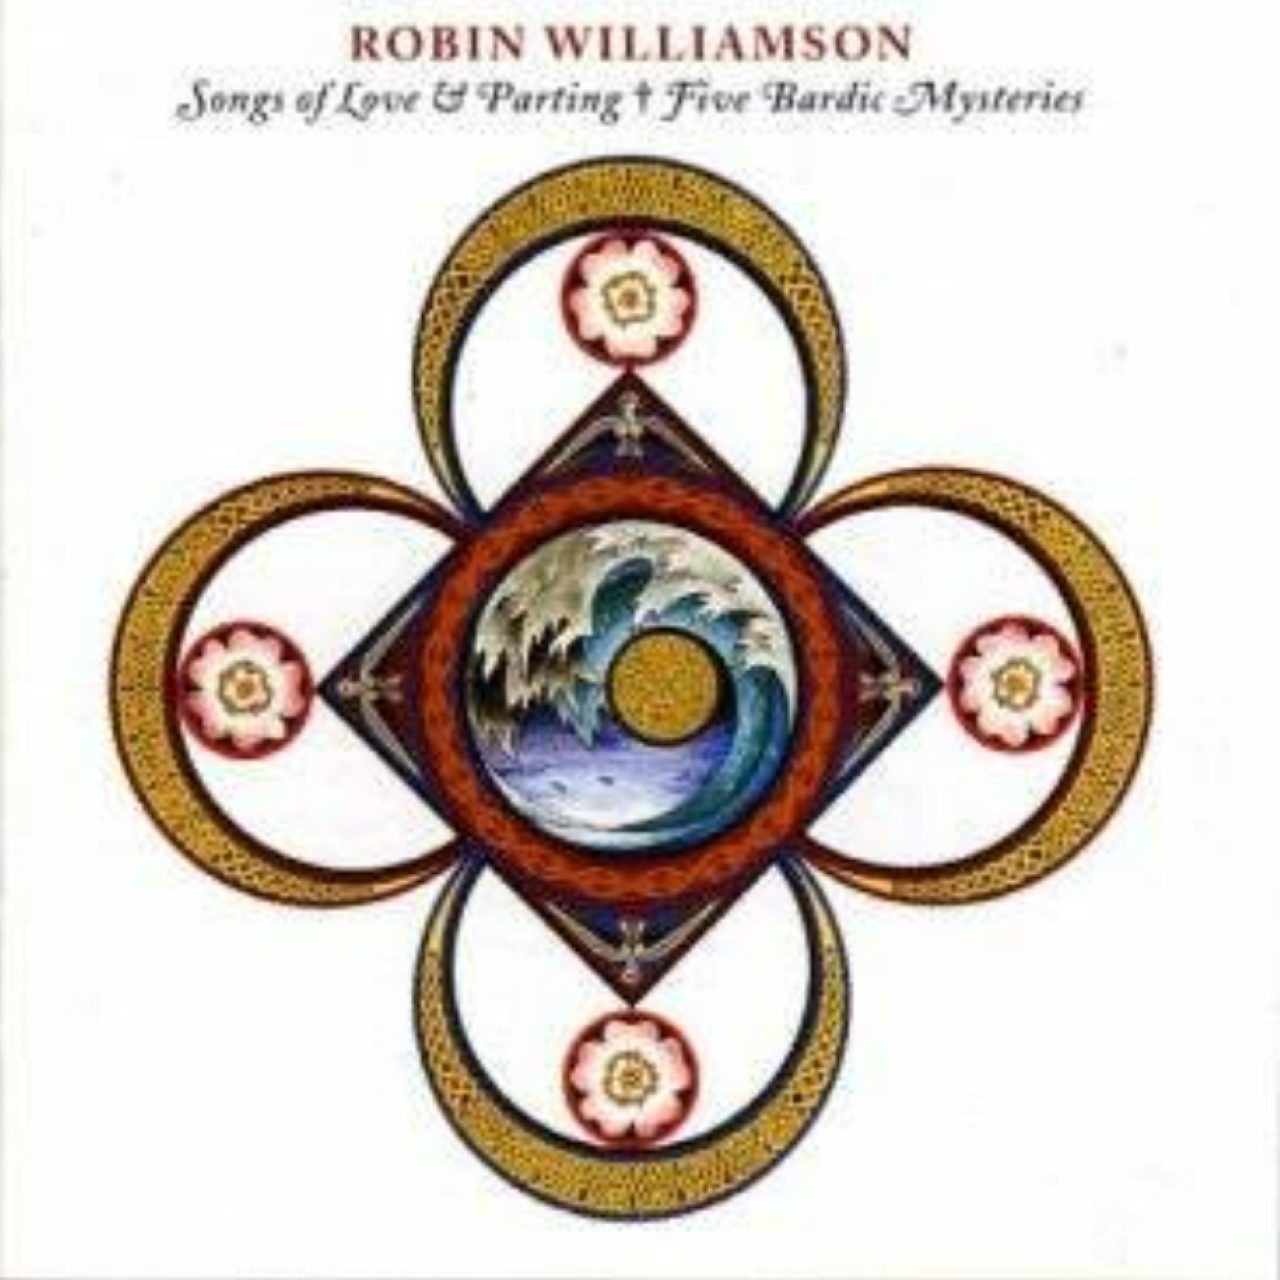 Robin Williamson – Songs Of Love & Parting + Five Bardic Mysteries cover album